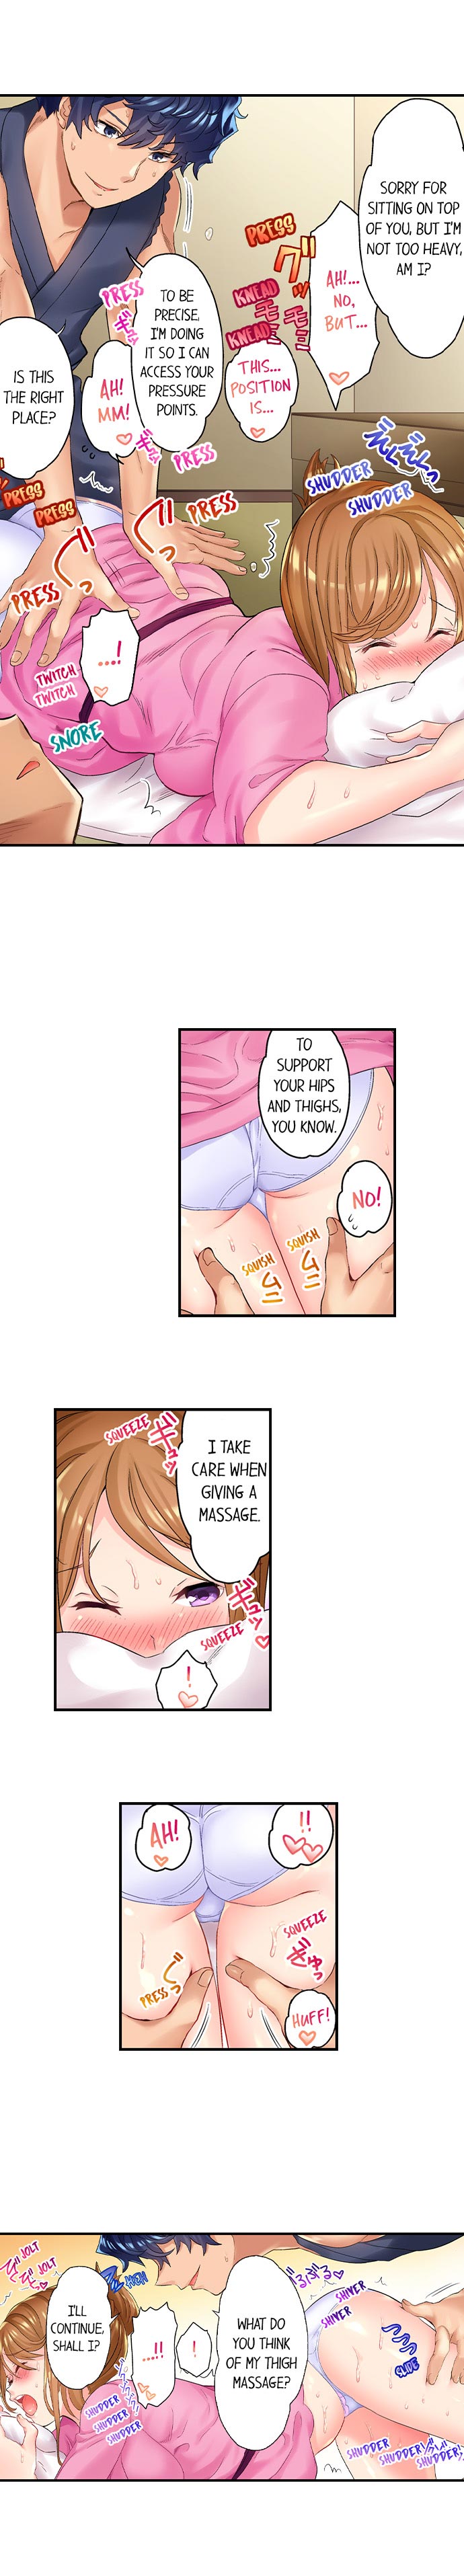 NTR Massage - Chapter 2 Page 7